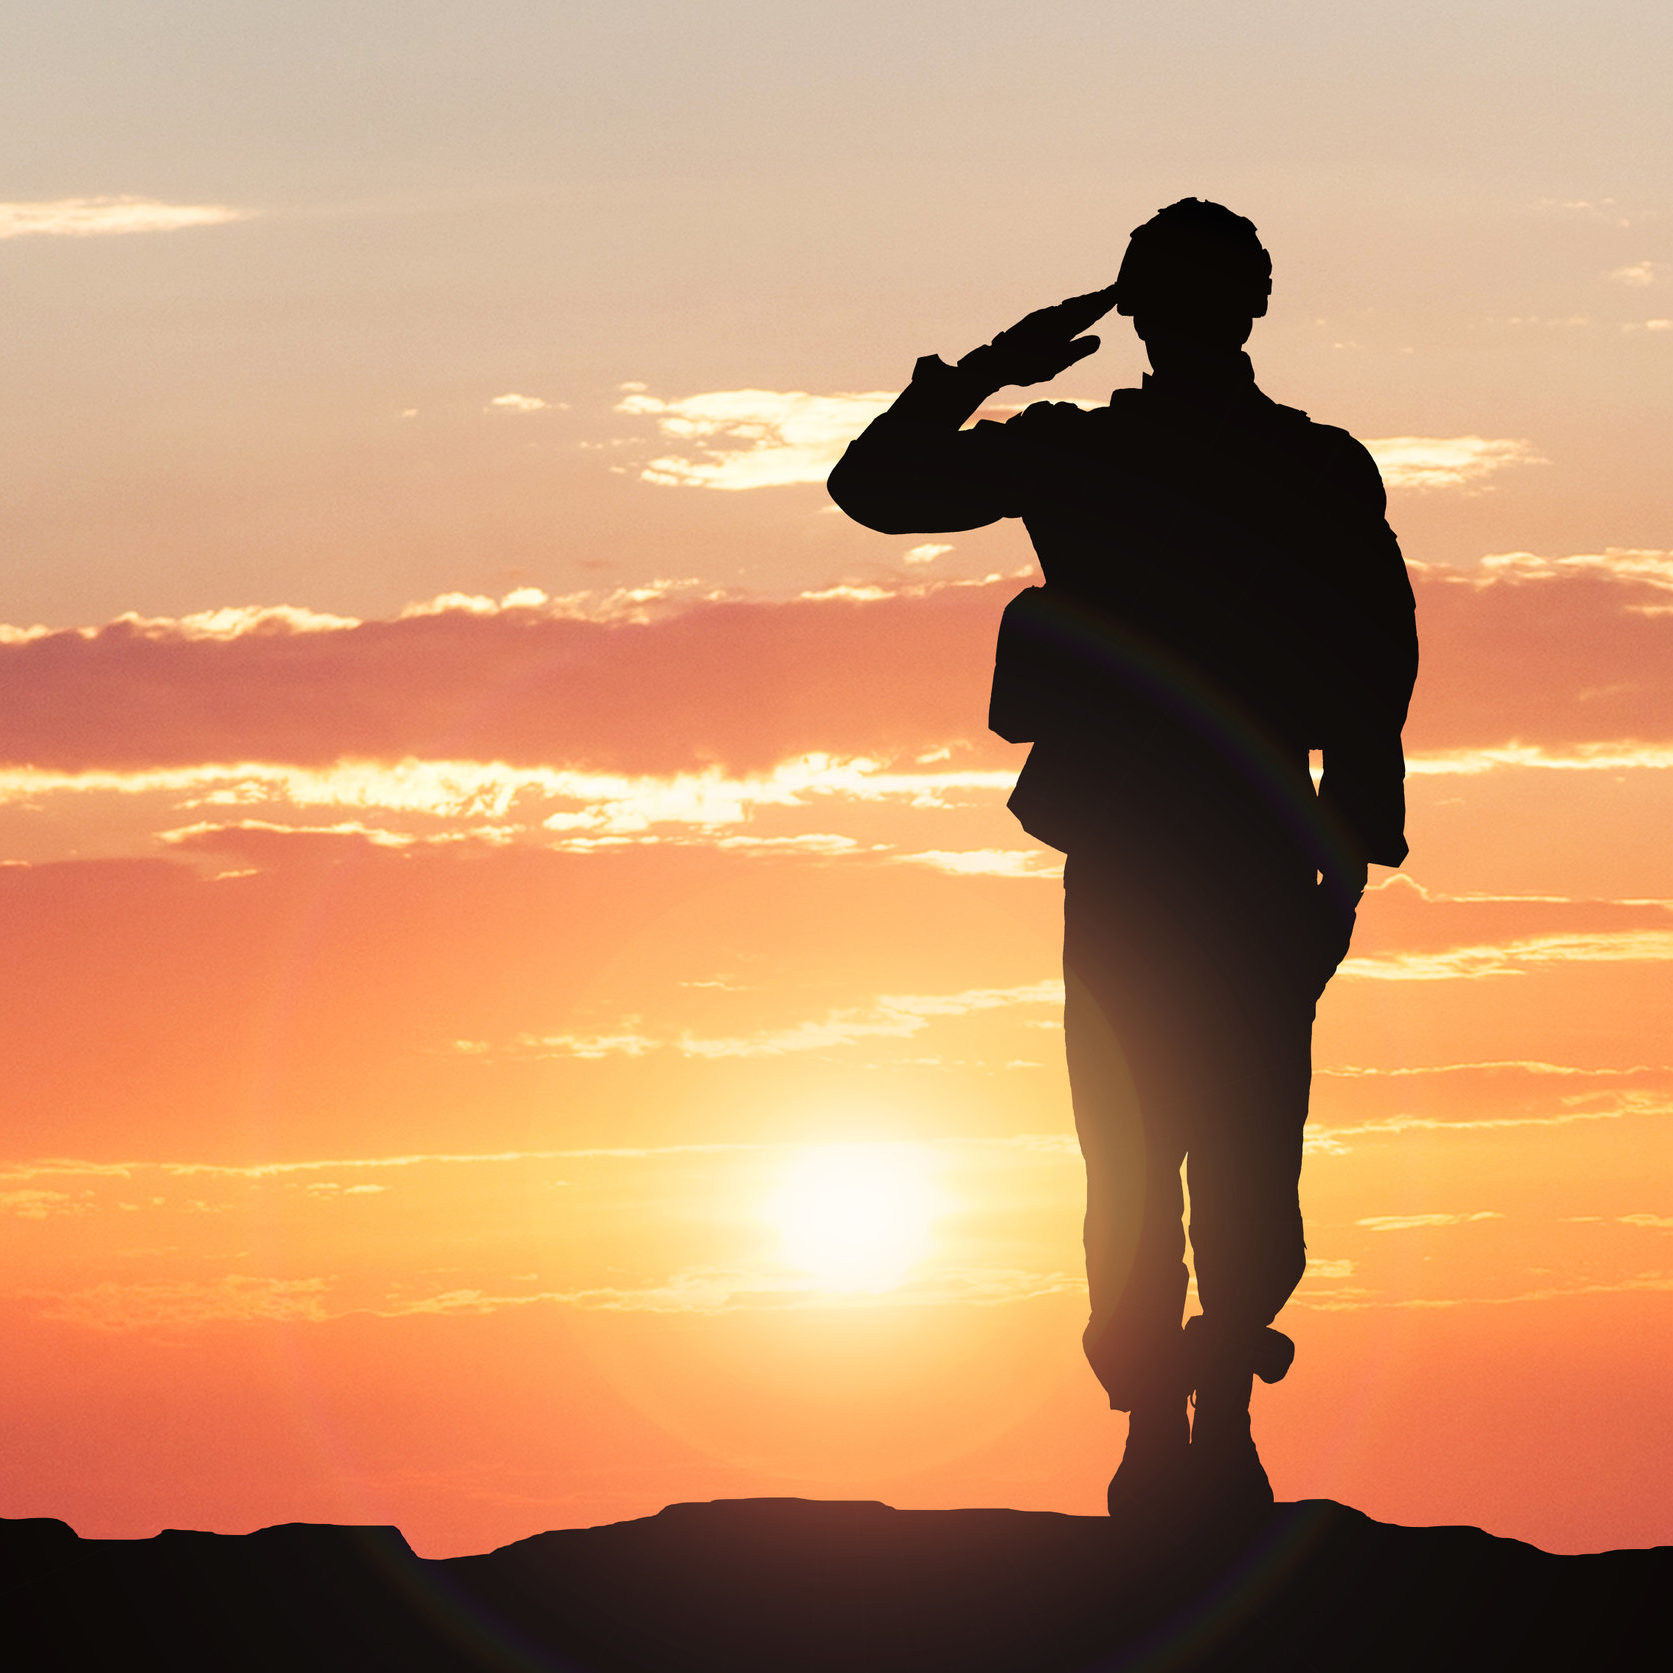 Silhouette of military soldier saluting in front of sunset, military transition assistance concept